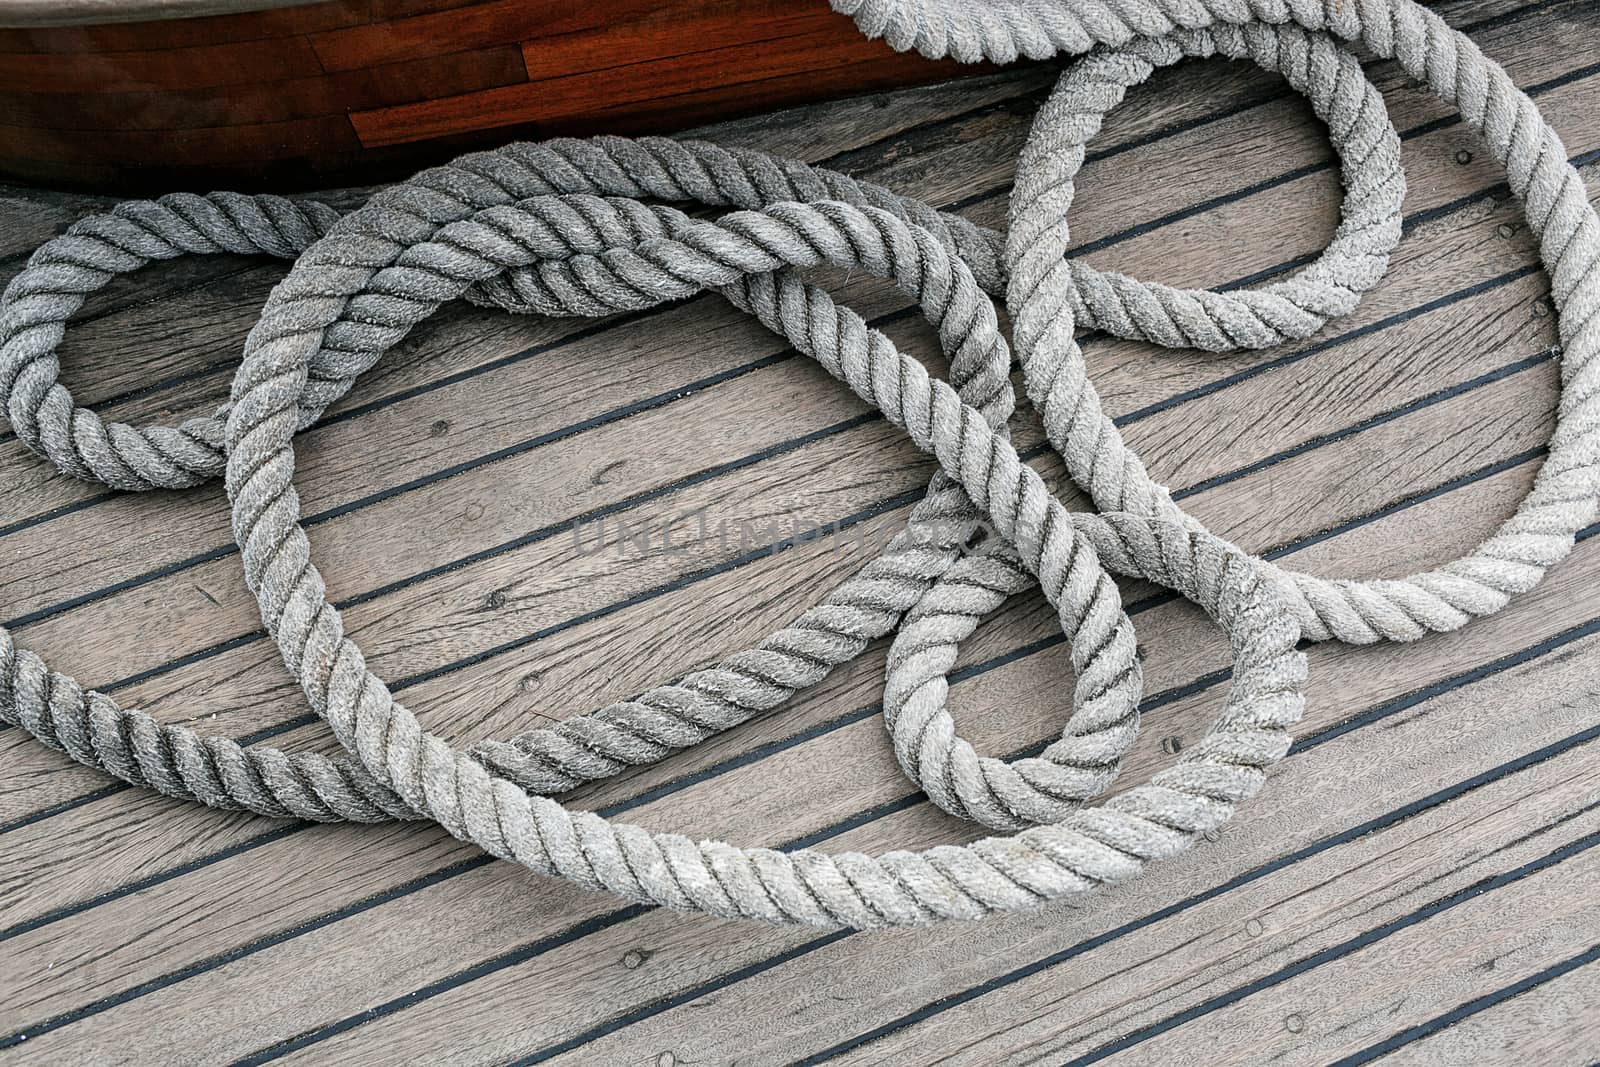 Overhead view of neatly coiled rope on a wooden deck 